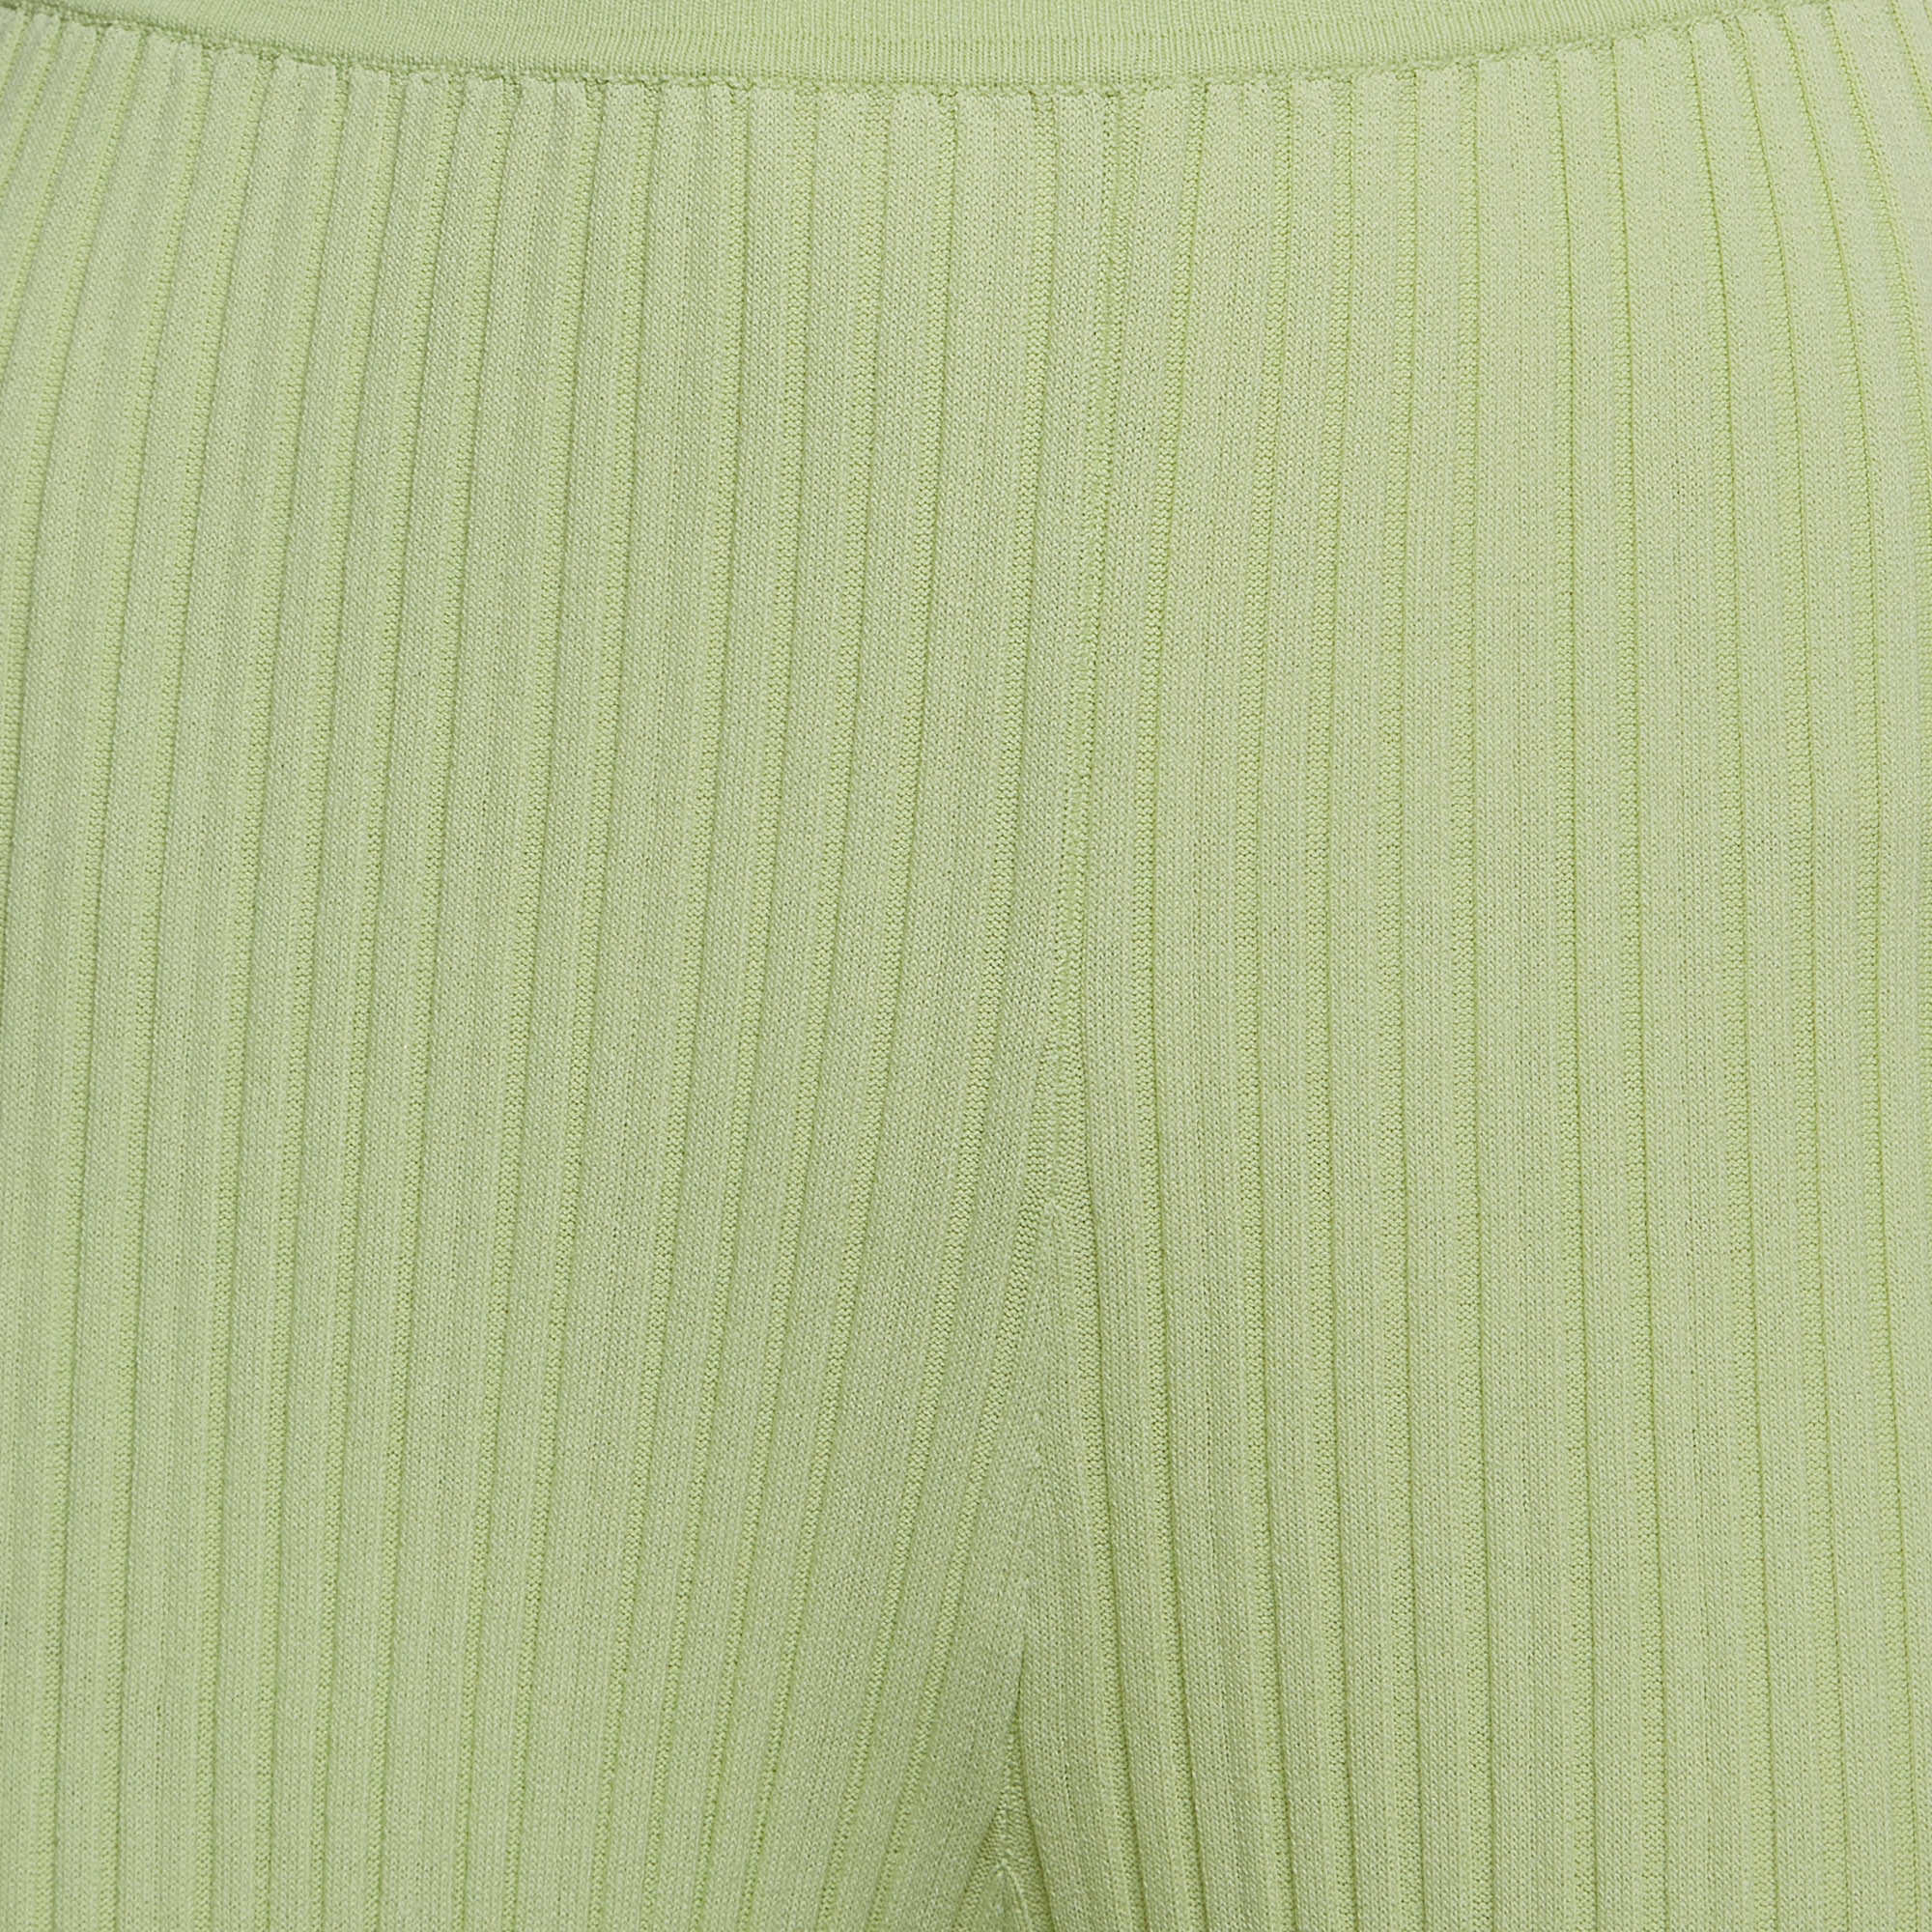 Dion Lee Mint Green Ribbed Knit Pants M